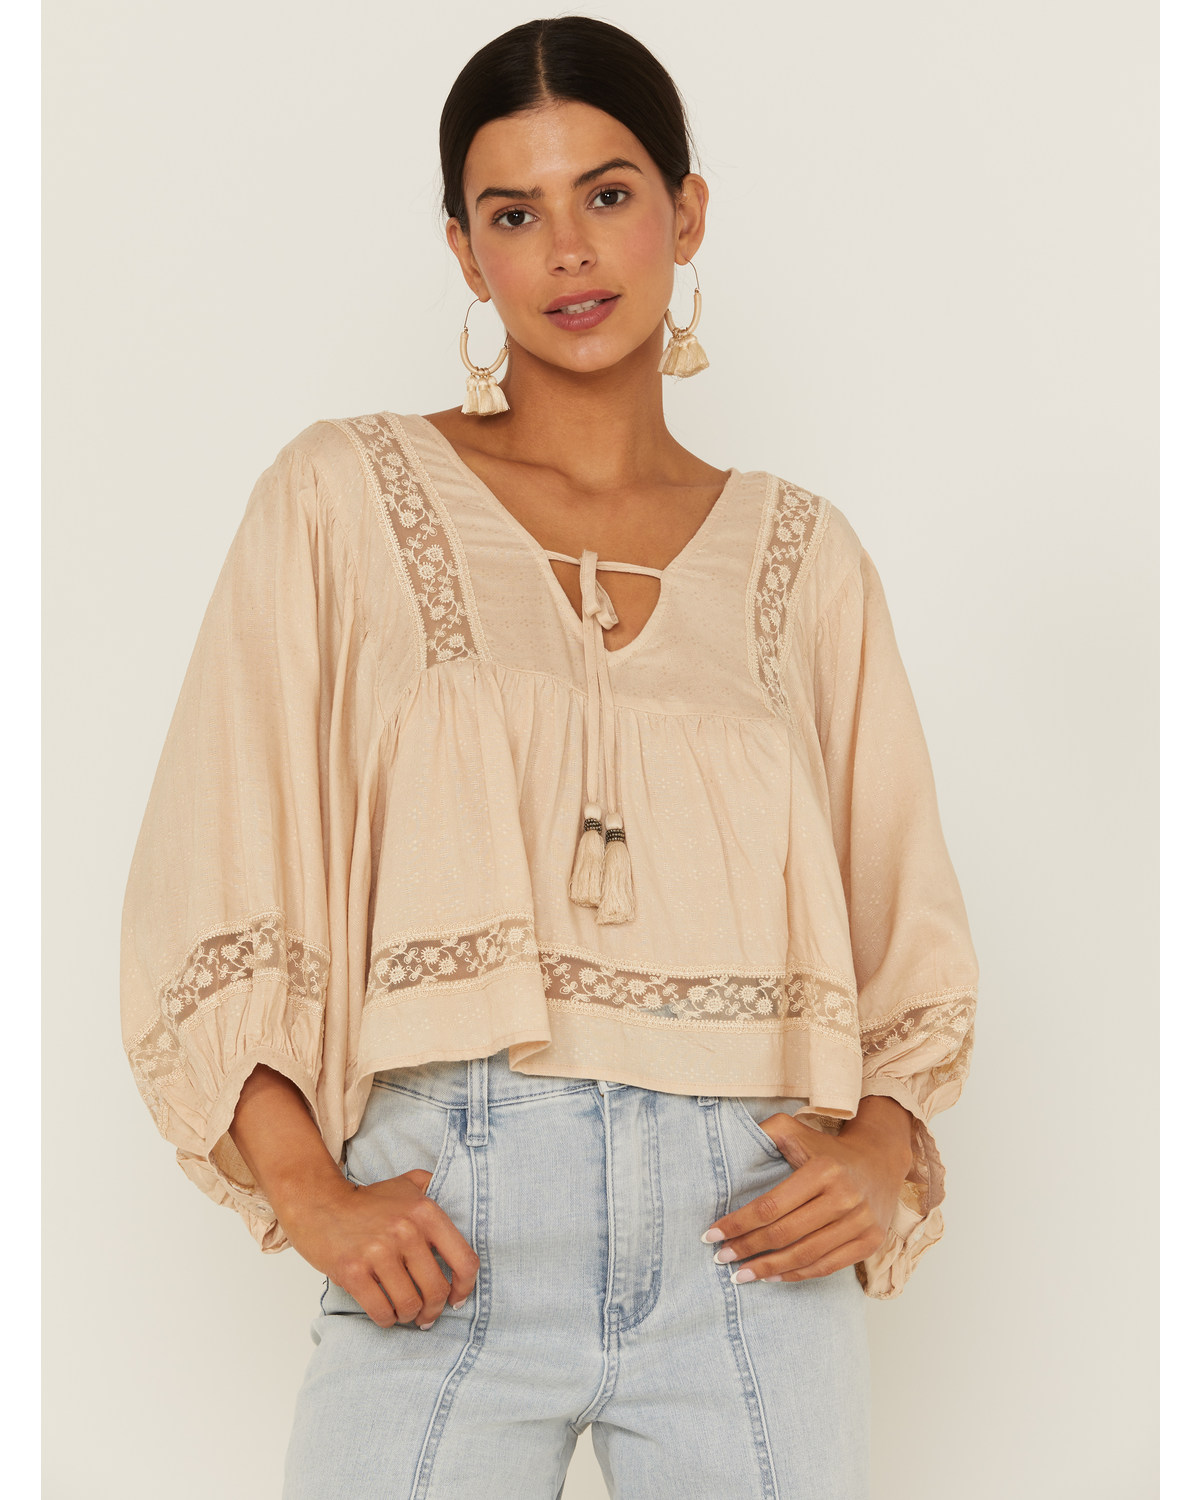 Band of the Free Women's Faun Lace Top